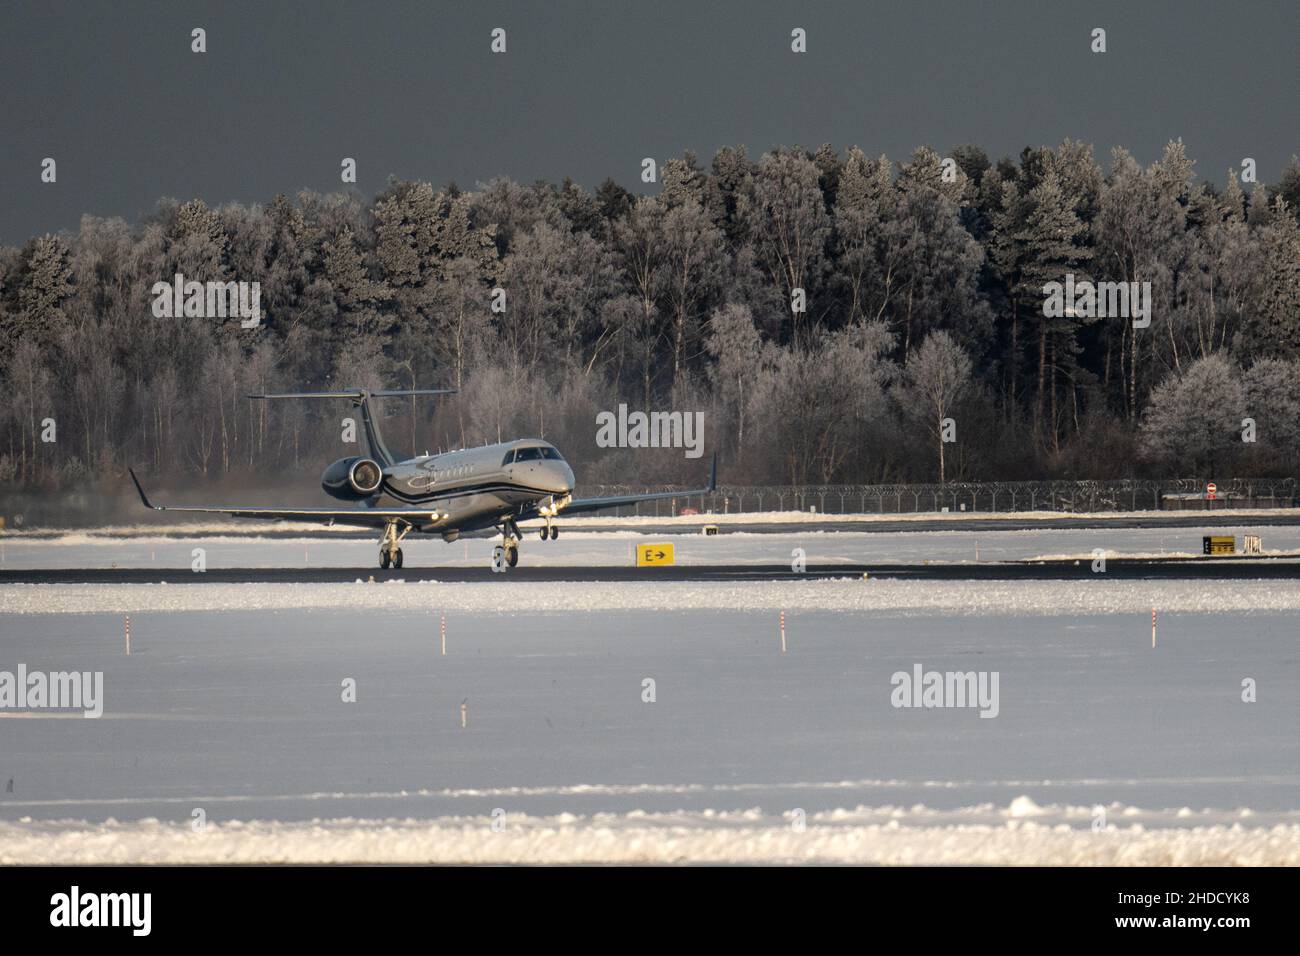 27-12-2021 Riga, Latvia Plane almost landed at the runway. Engine heat behind the plane. Stock Photo